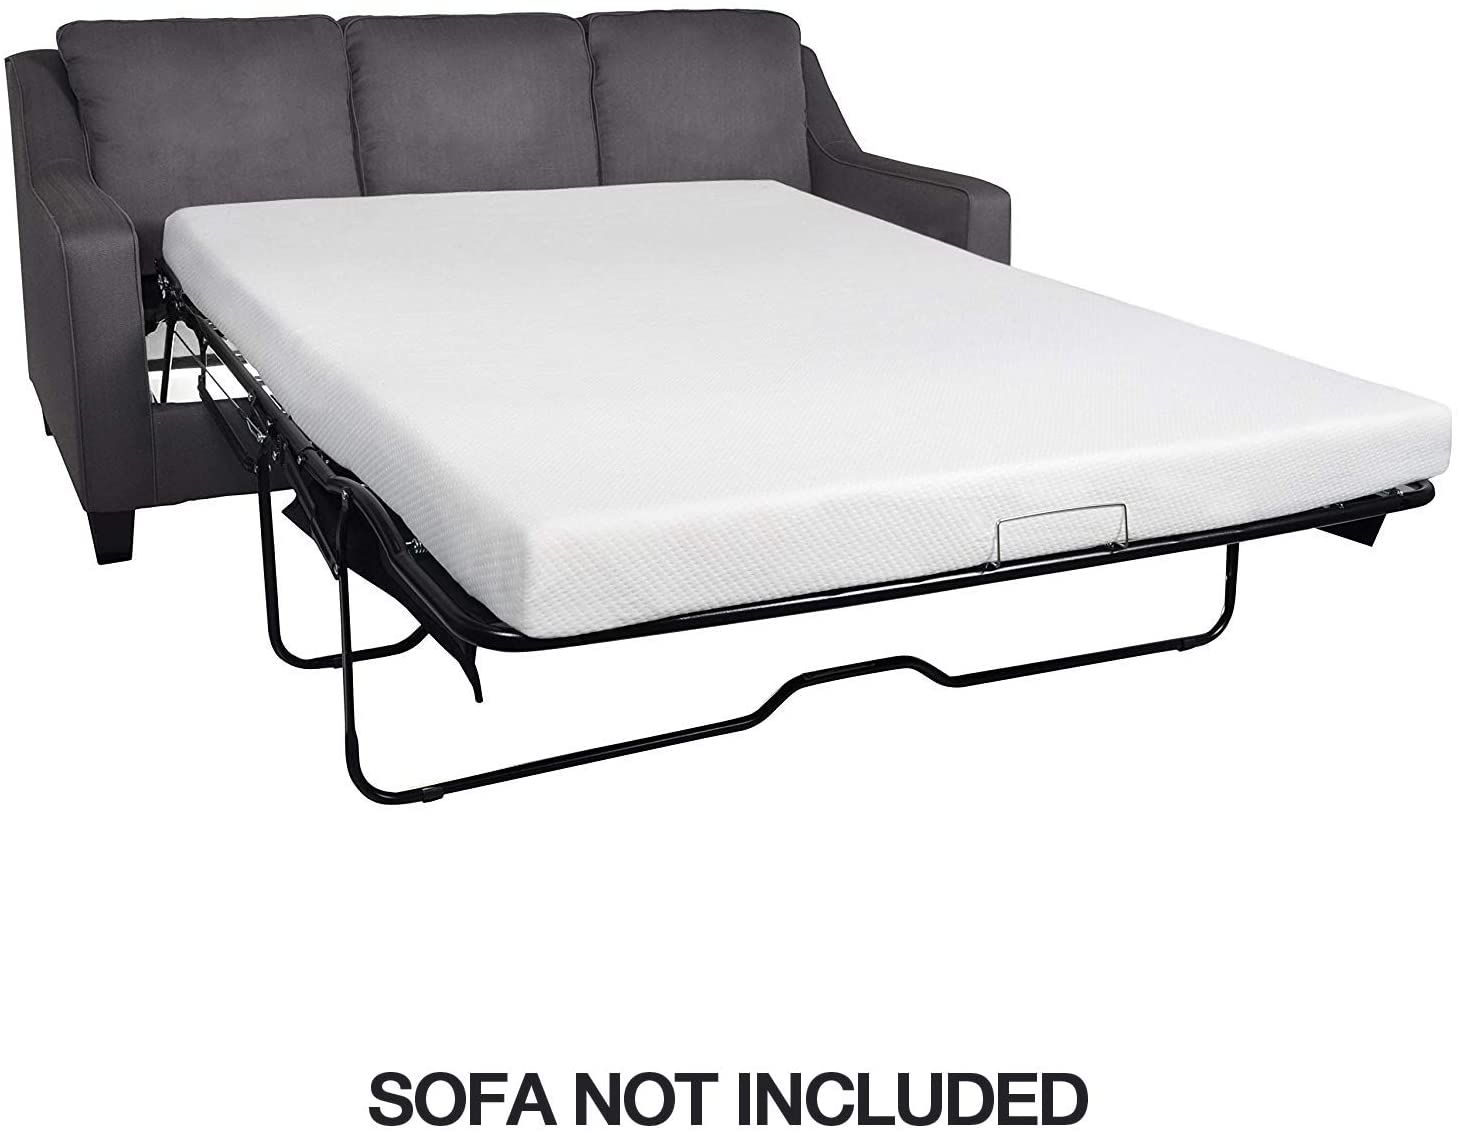 4.5 inch sofa bed mattress replacement